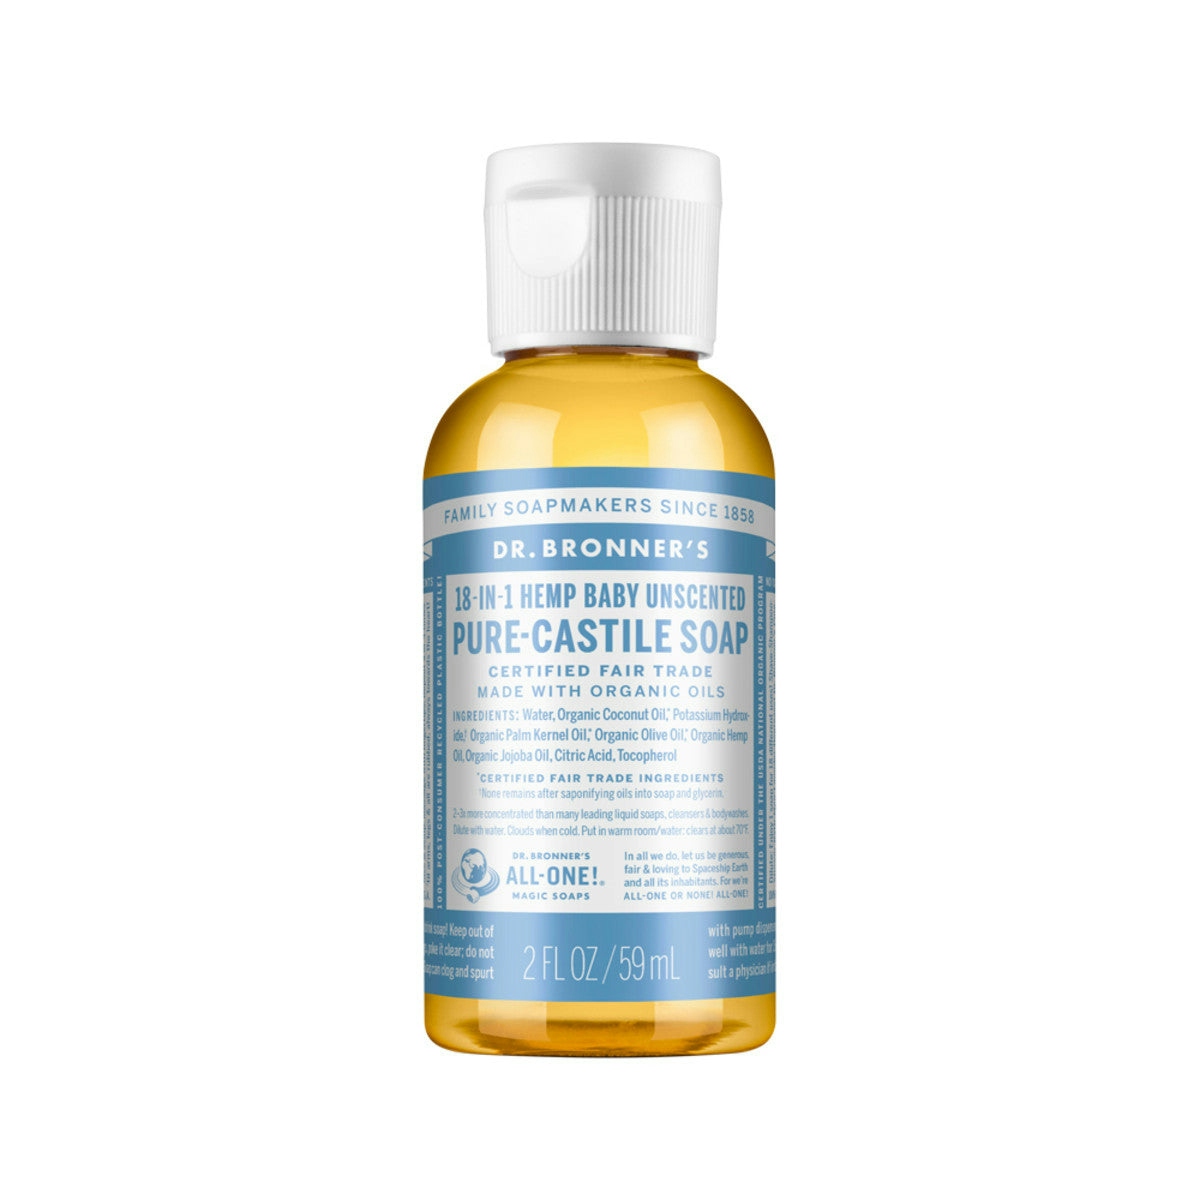 image of Dr. Bronner's Pure-Castile Soap Liquid (Hemp 18-in-1) Baby Unscented 59ml on white background 